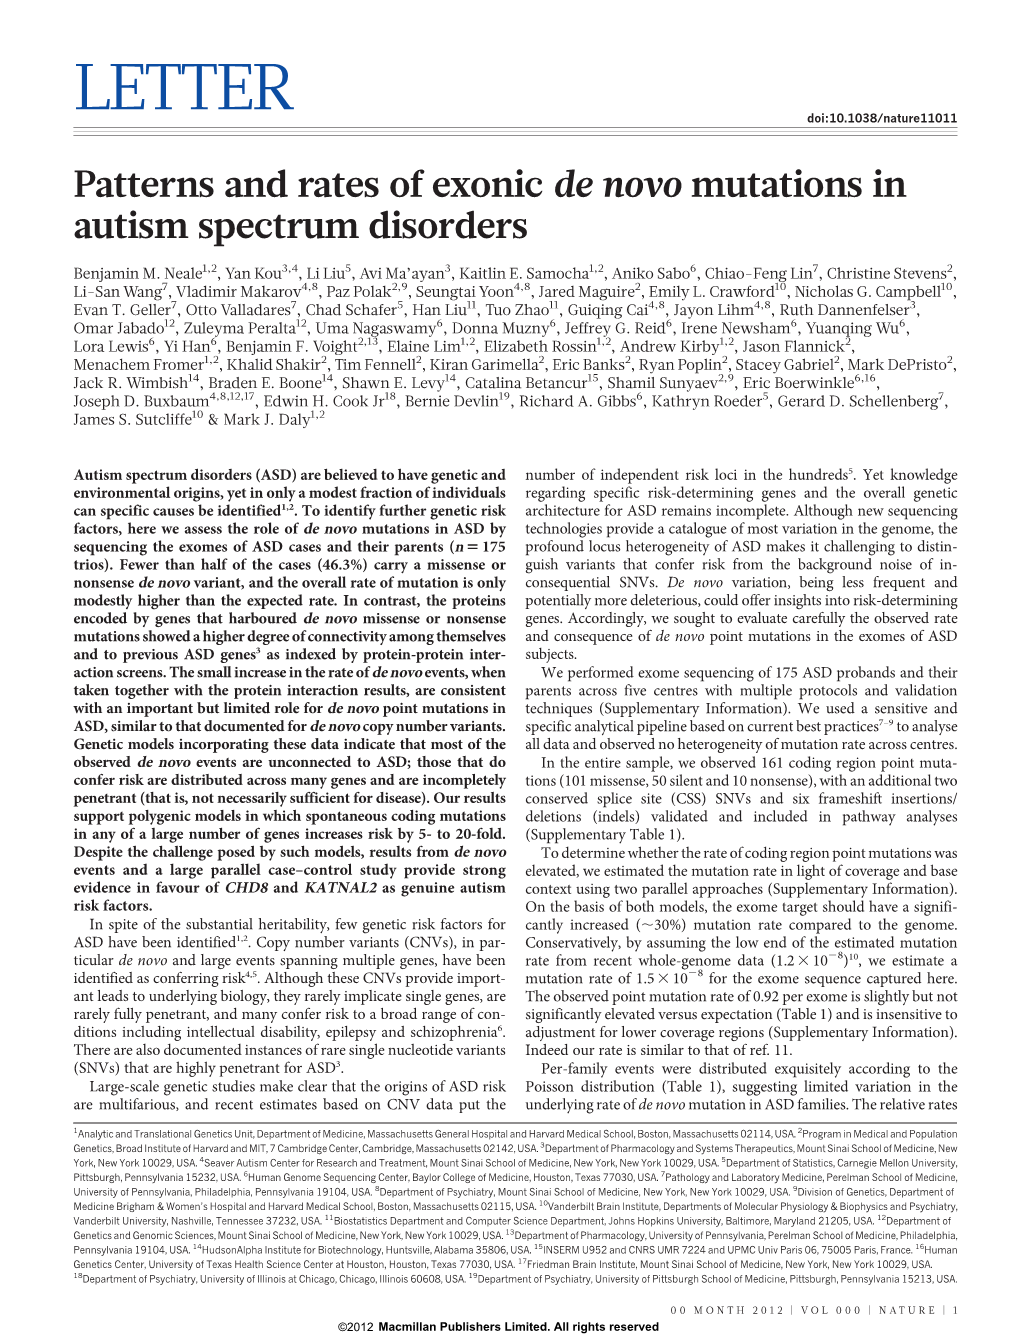 Patterns and Rates of Exonic De Novo Mutations in Autism Spectrum Disorders